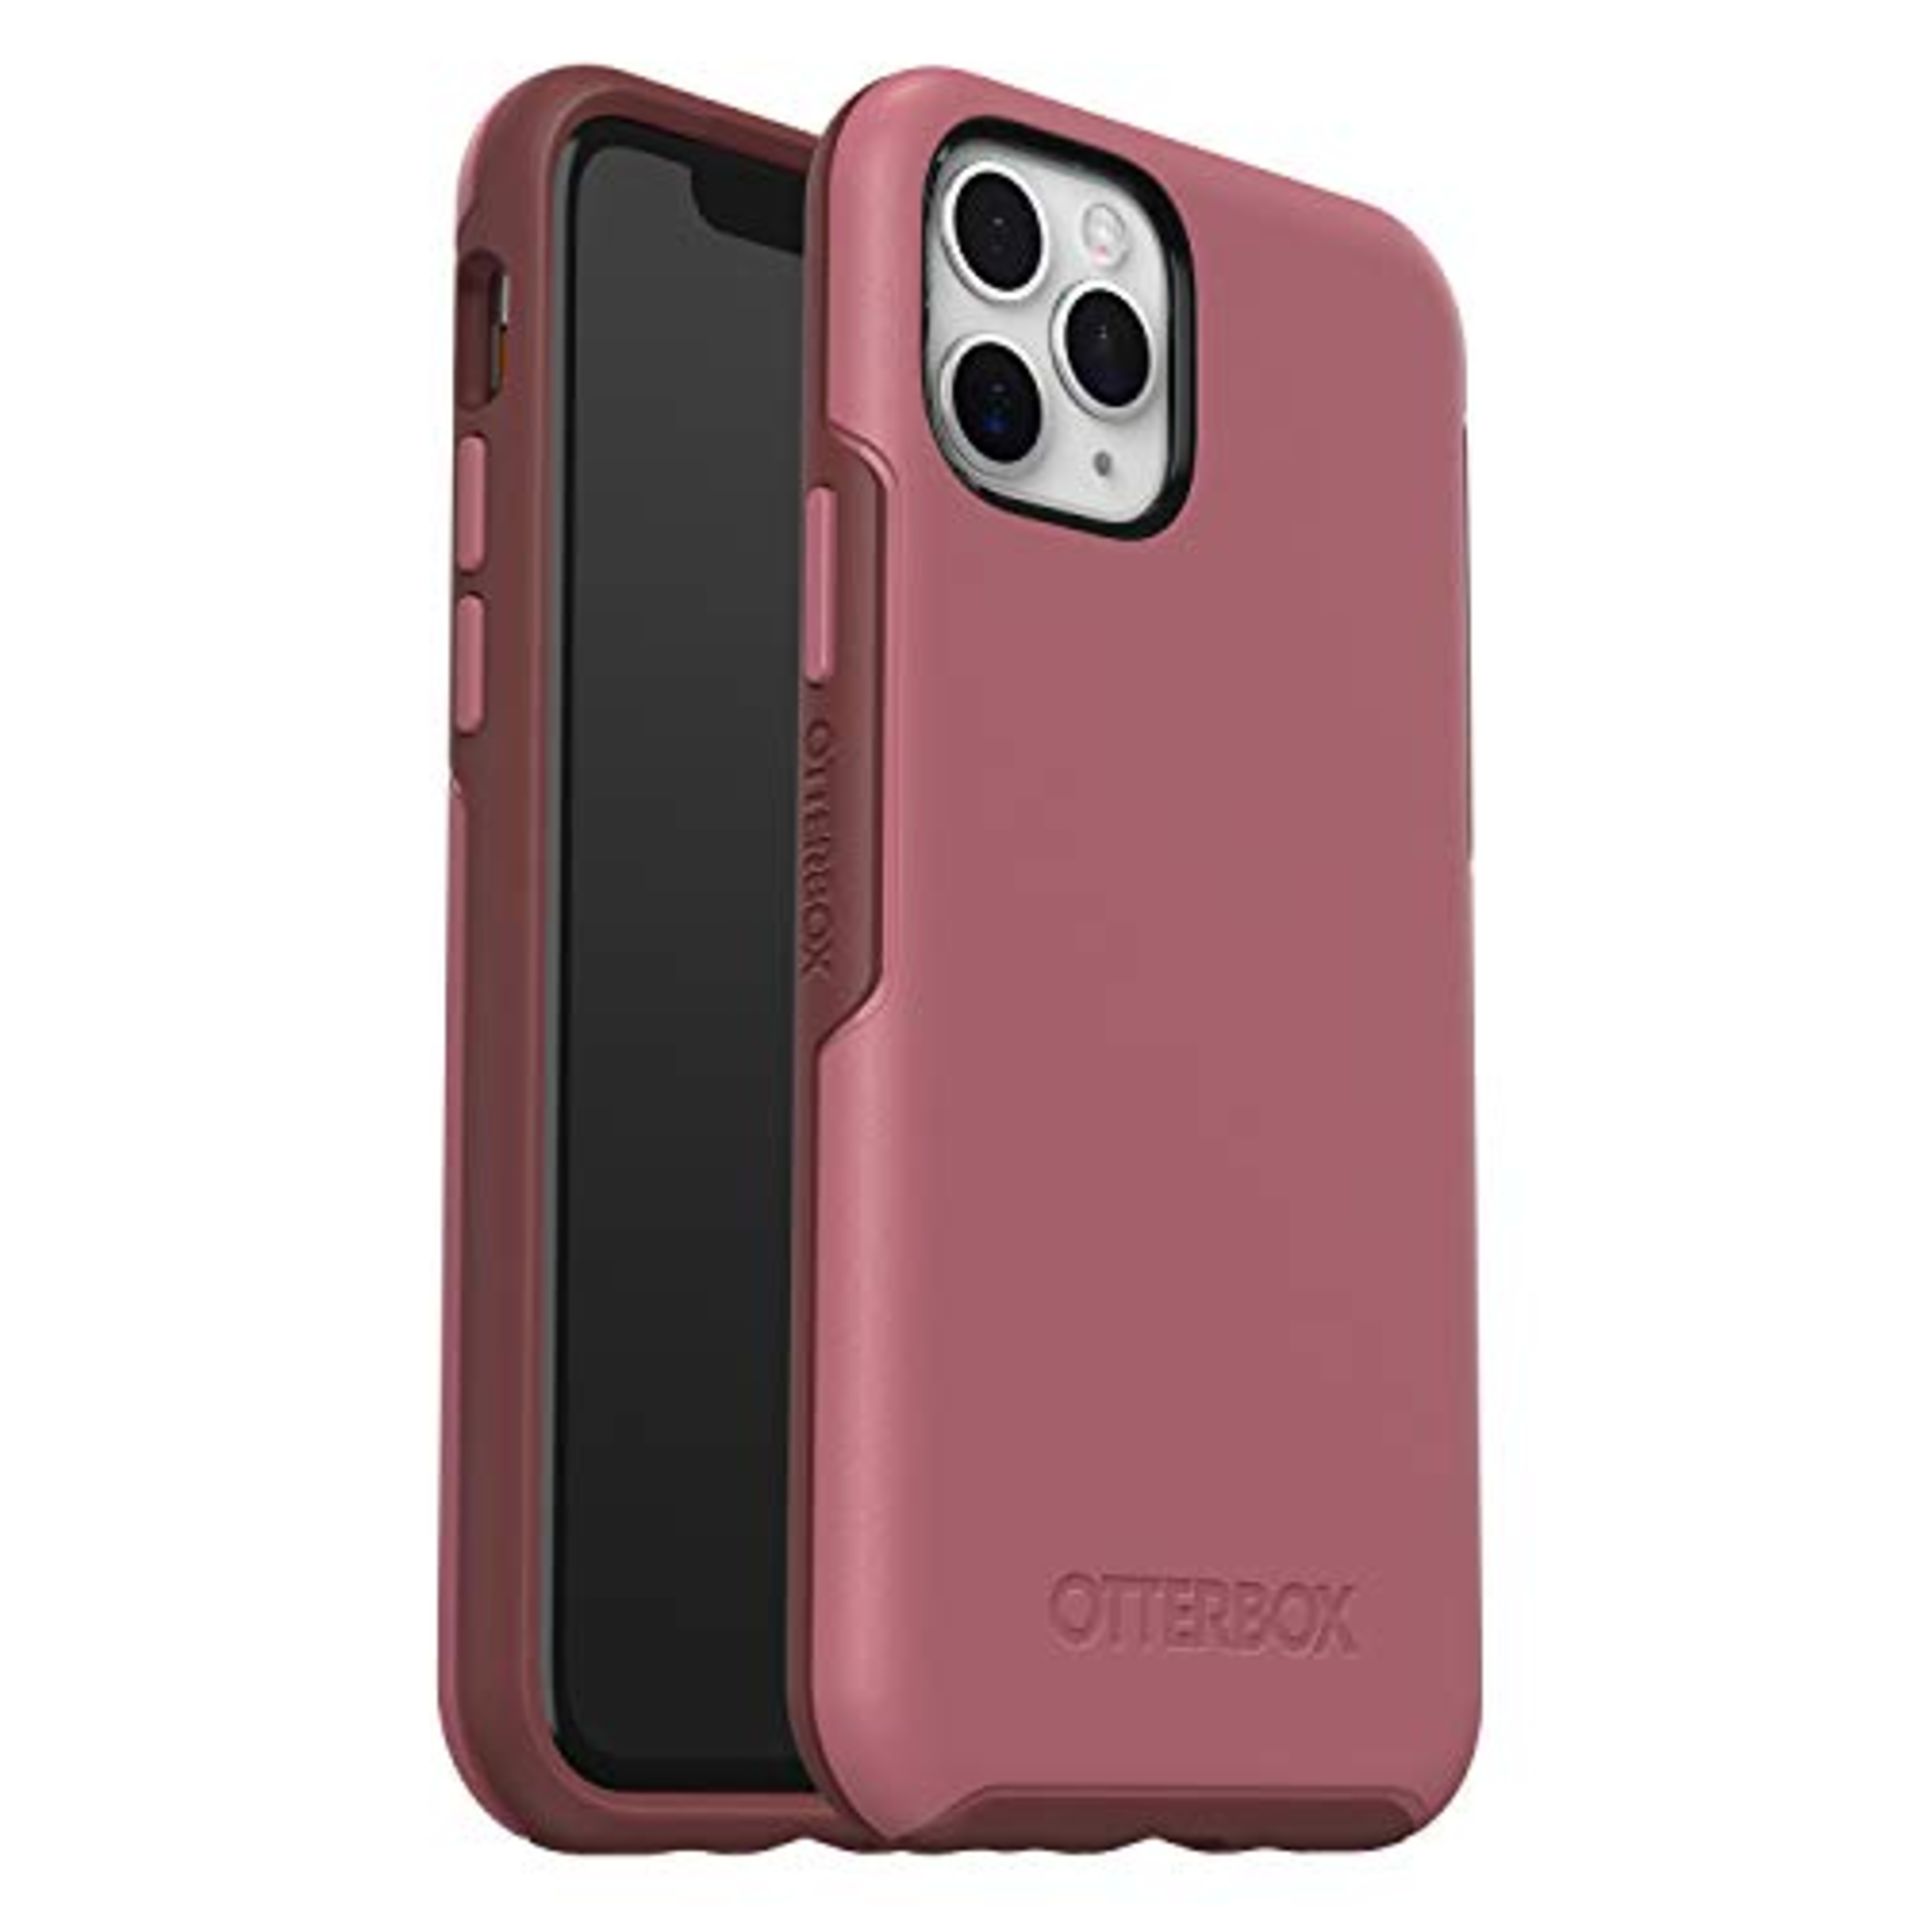 OtterBox Symmetry Series, Sleek Protection for iPhone 11 Pro - Beguiled Rose (77-63009